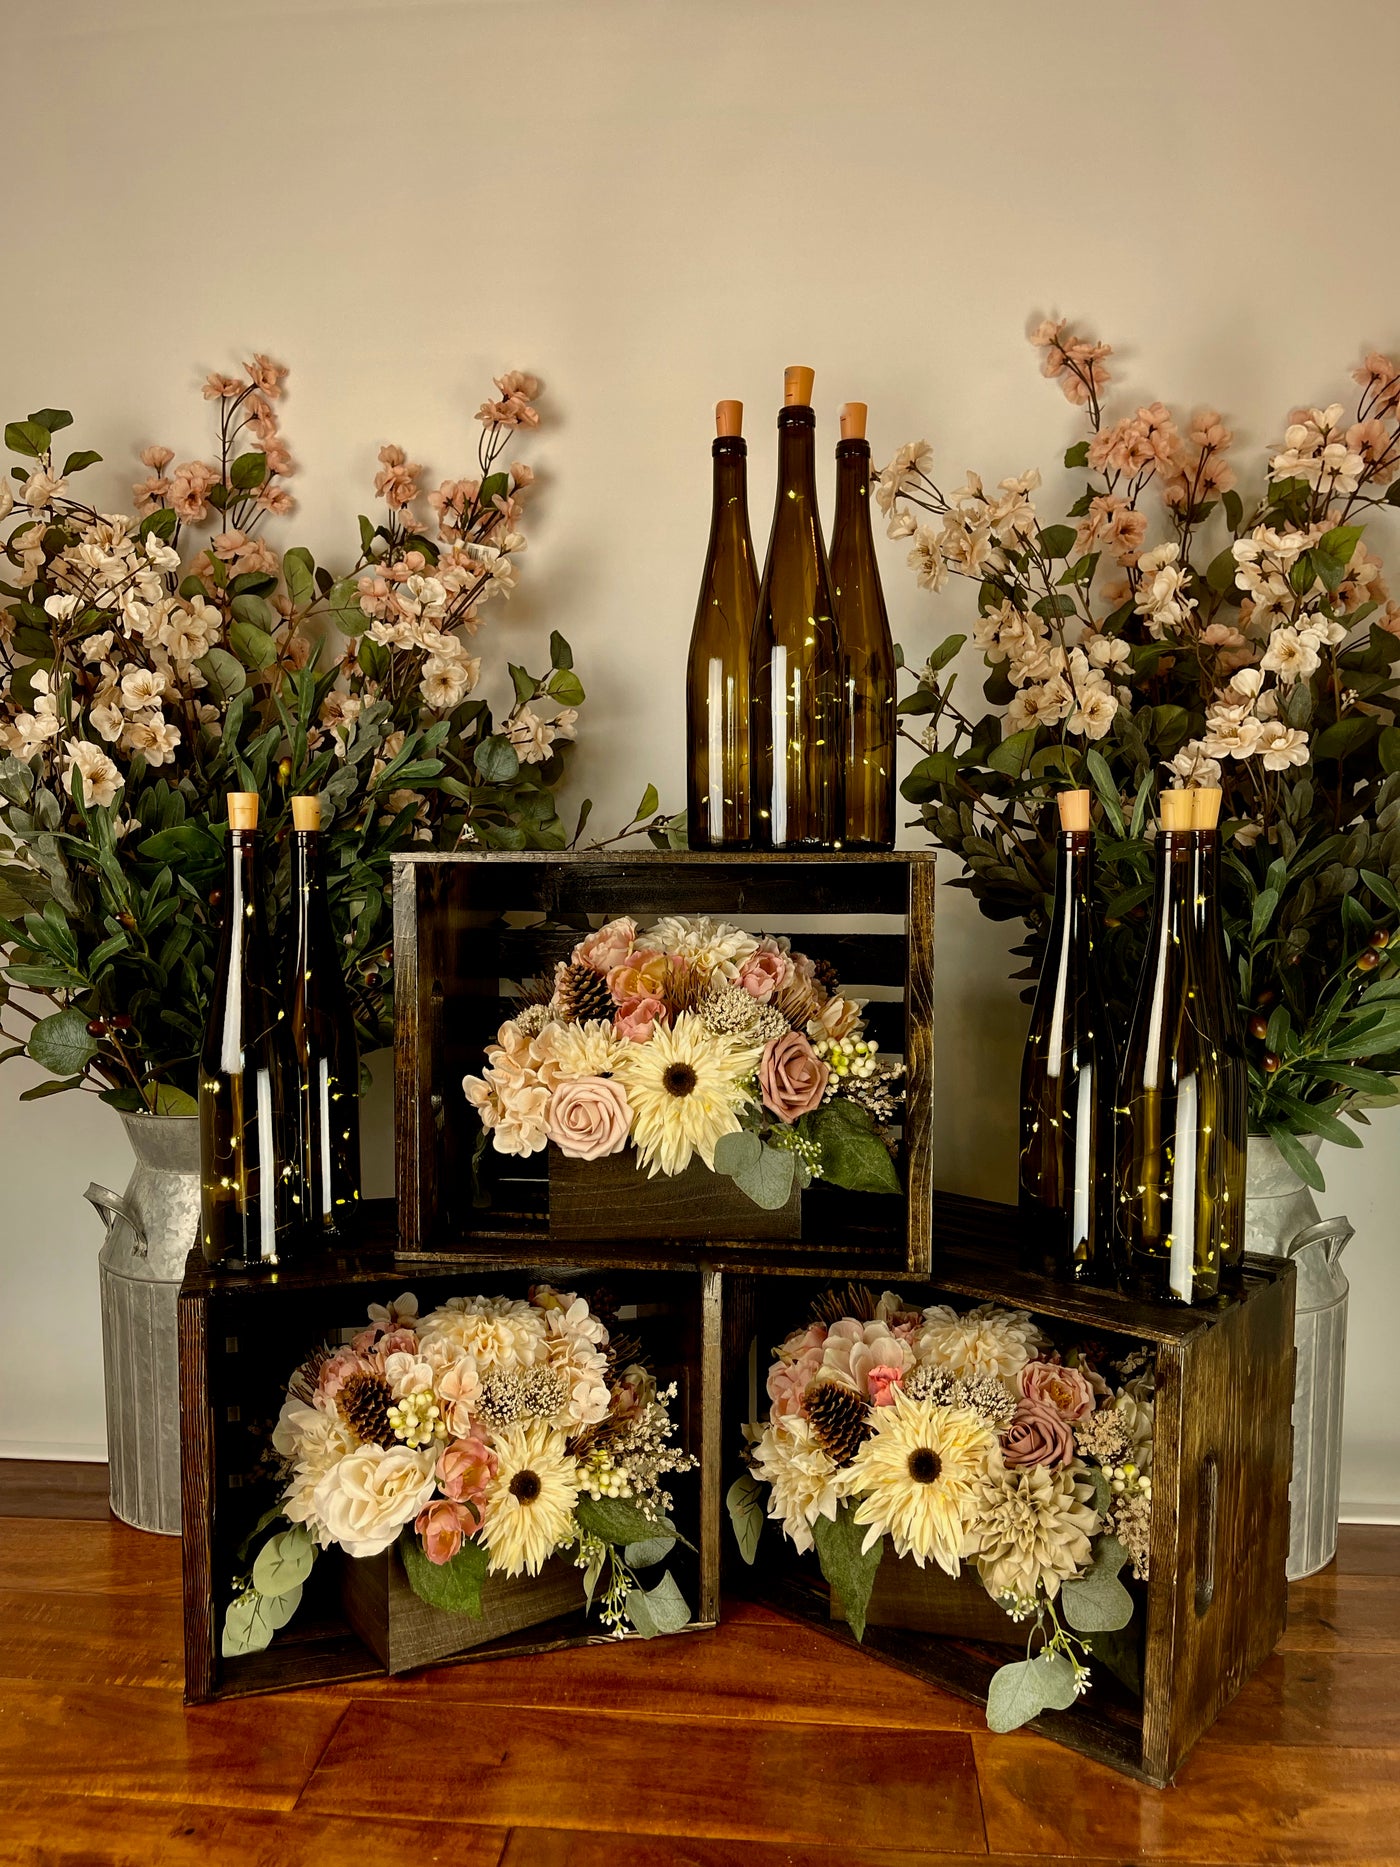 These two galvanized steel milk containers can come filled with either eucalyptus accompanied by small beige and pale pink flowers, or eucalyptus alone. Containers are 15" tall, and with the florals are 36" tall.